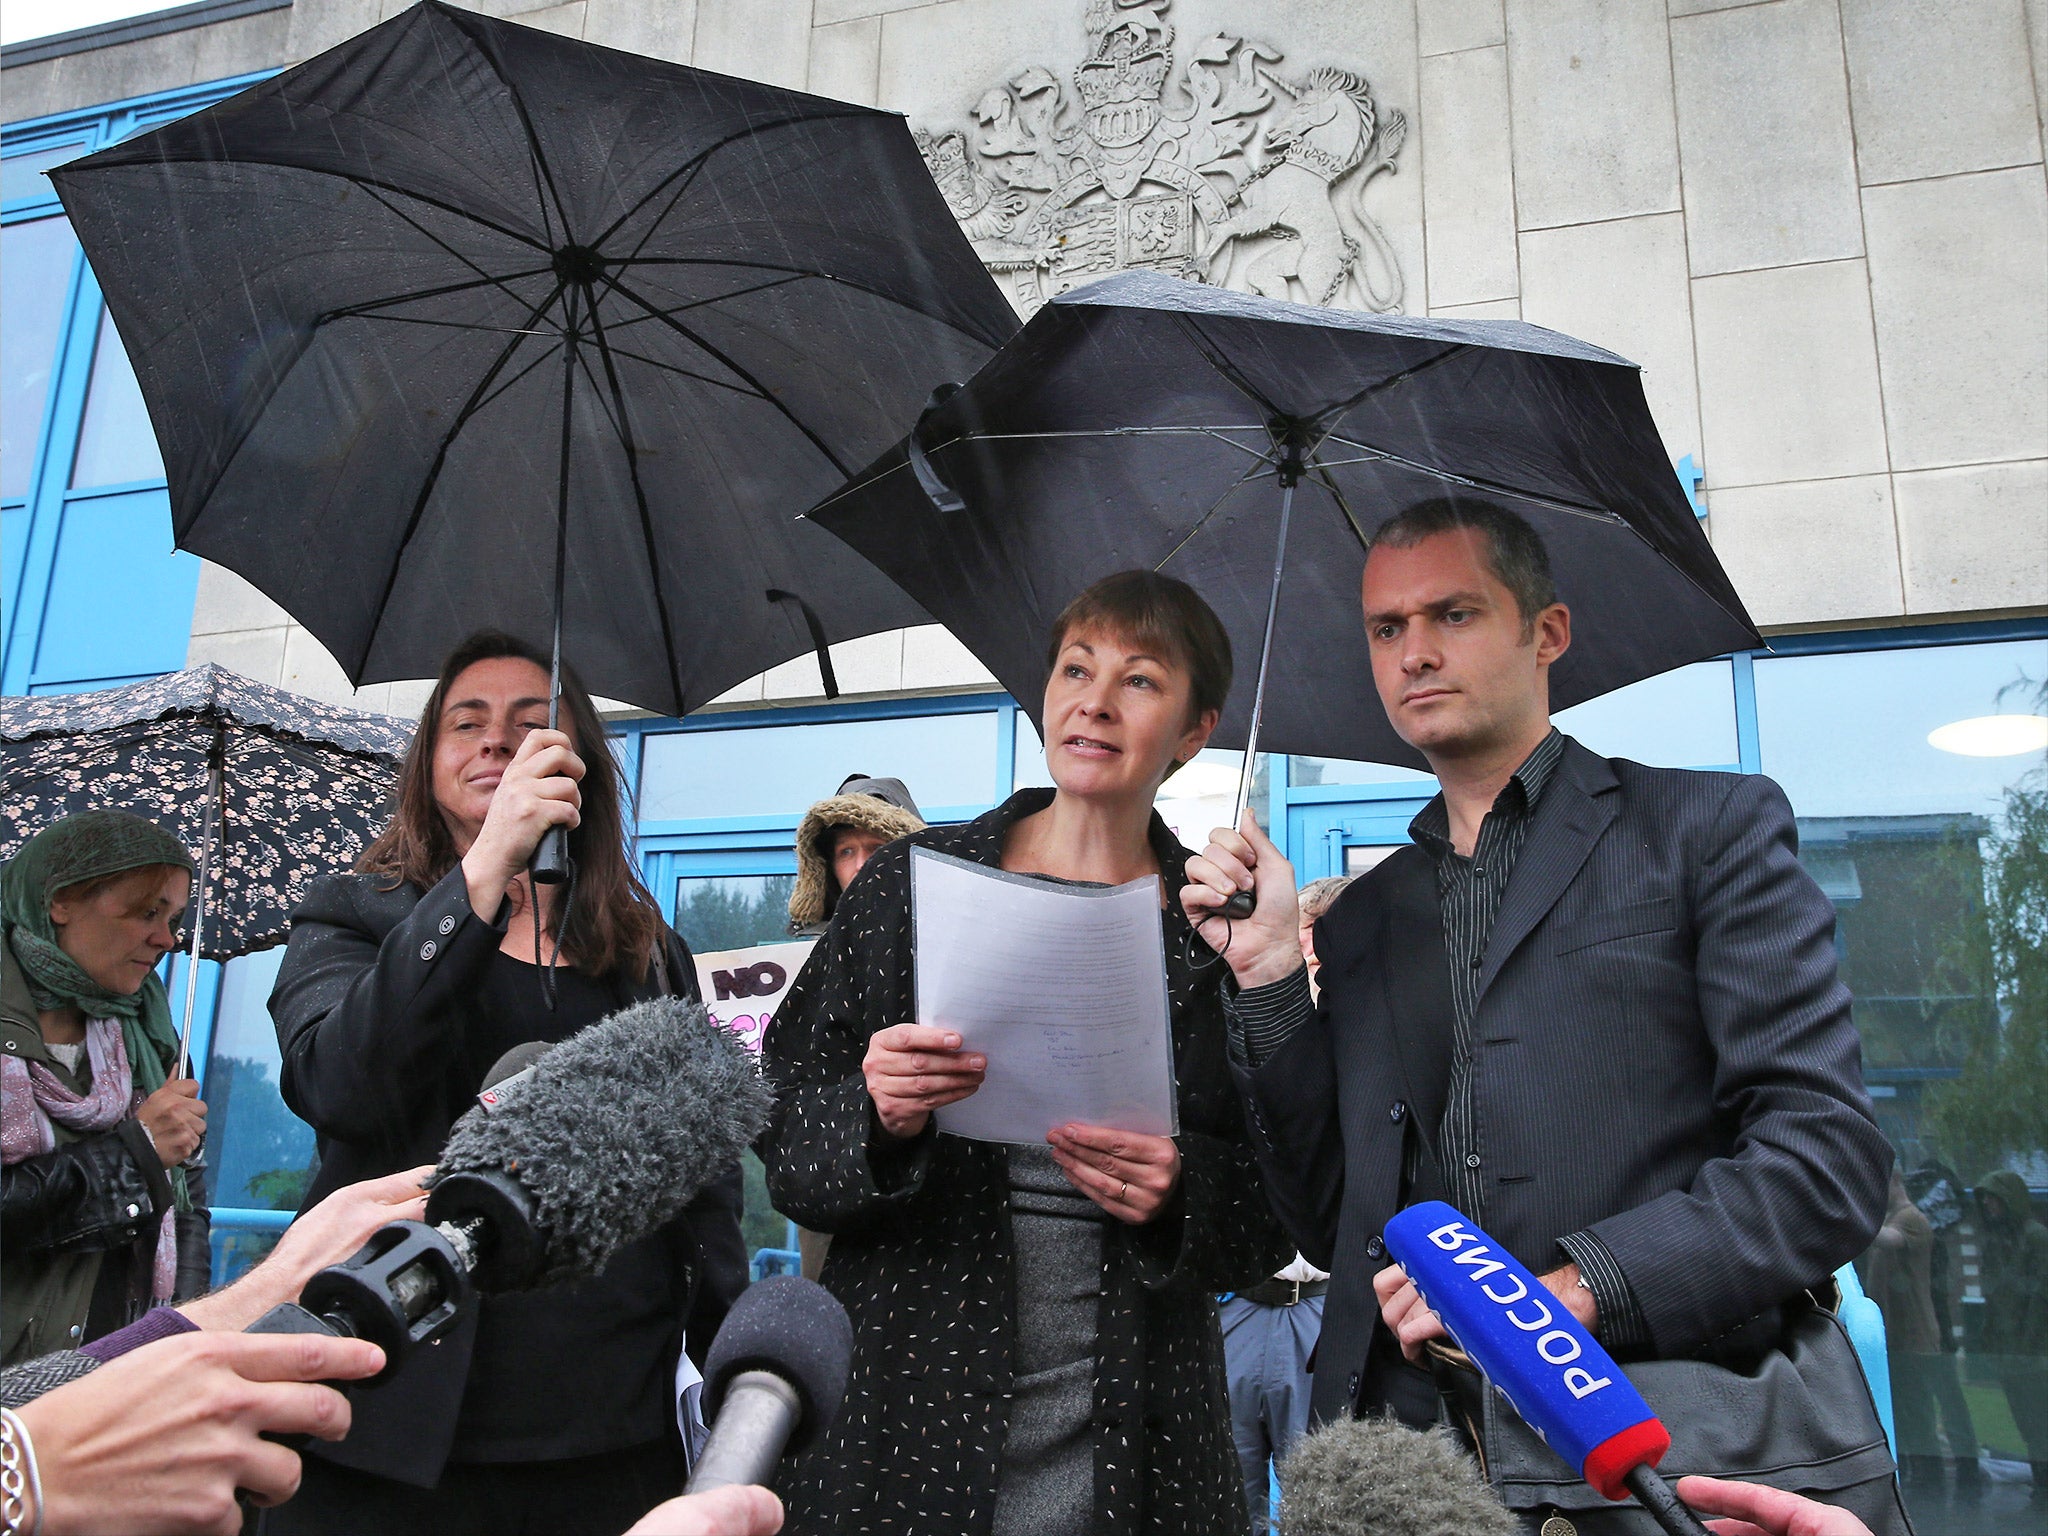 The Green Party MP Caroline Lucas outside Crawley magistrates' court in October 2013 after pleading not guilty to charges relating to a fracking protest at Balcombe